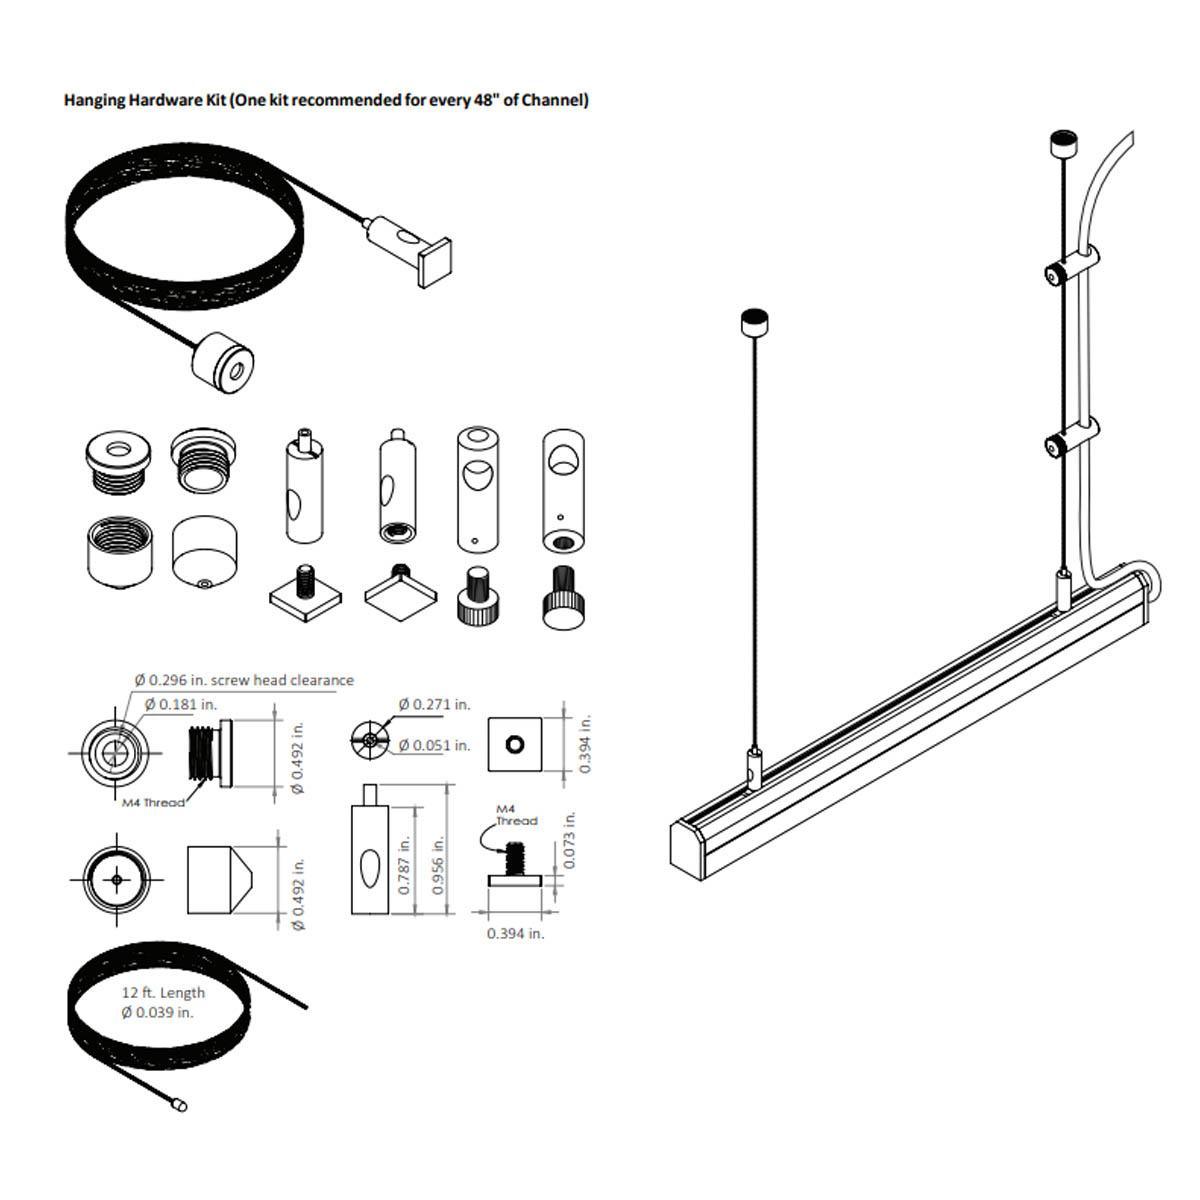 Hanging Hardware Kit, Pack of 2 hanging mounts, 2 Wire restrainers and 4 screws - Bees Lighting